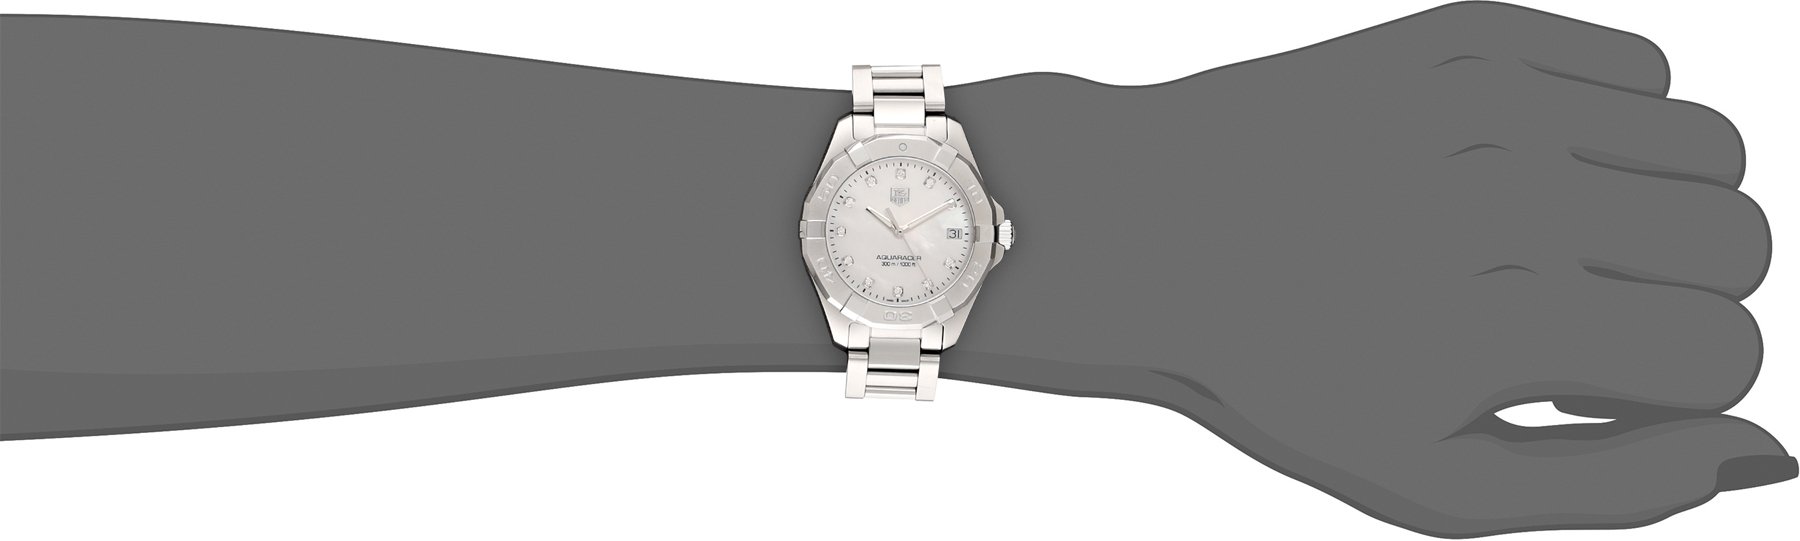 TAG Heuer Women's WAY1313.BA0915 Aquaracer Diamond-Accented Stainless Steel Watch